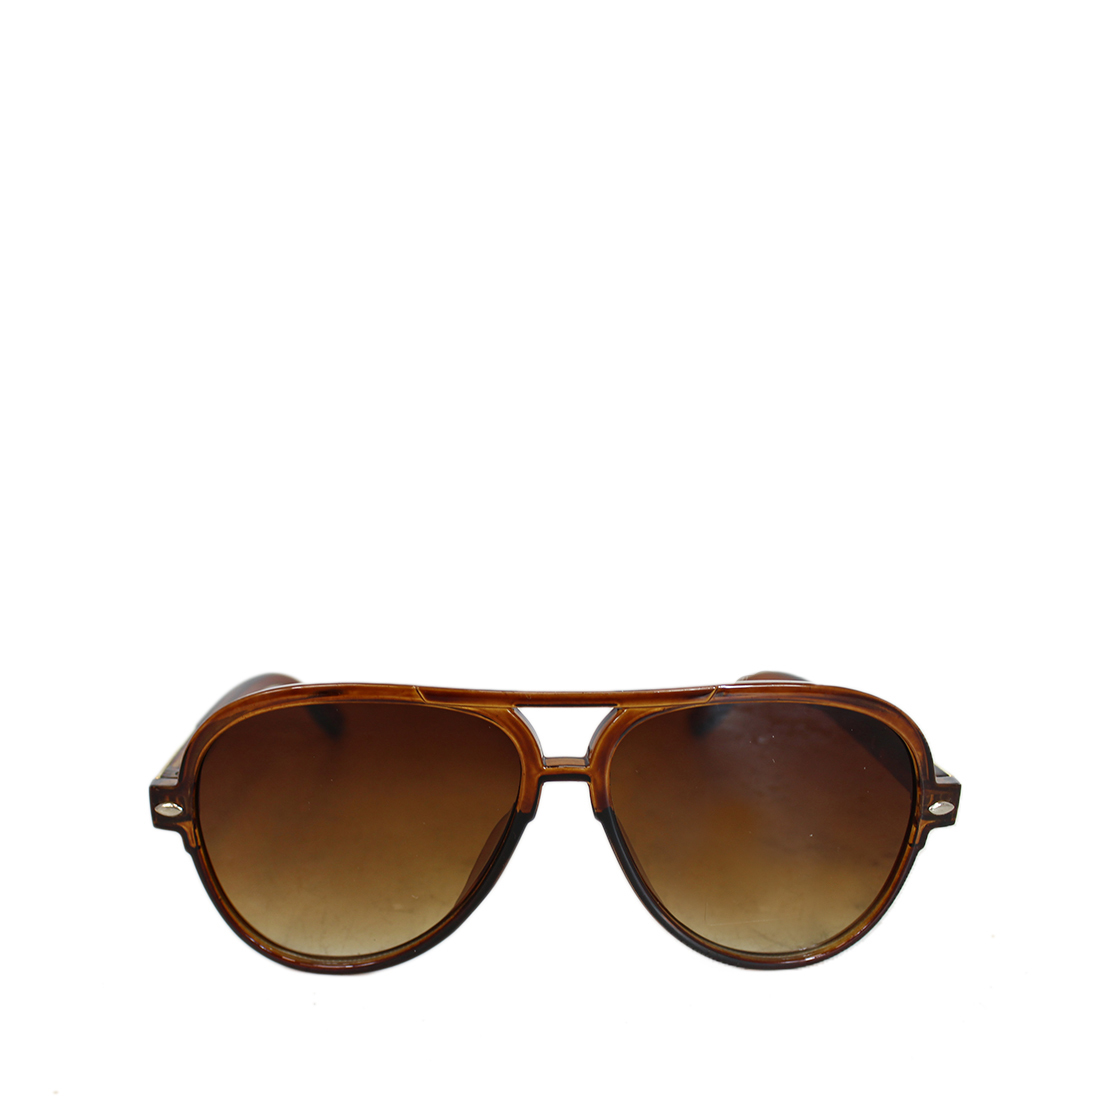 Rounded aviator style with gold frame design